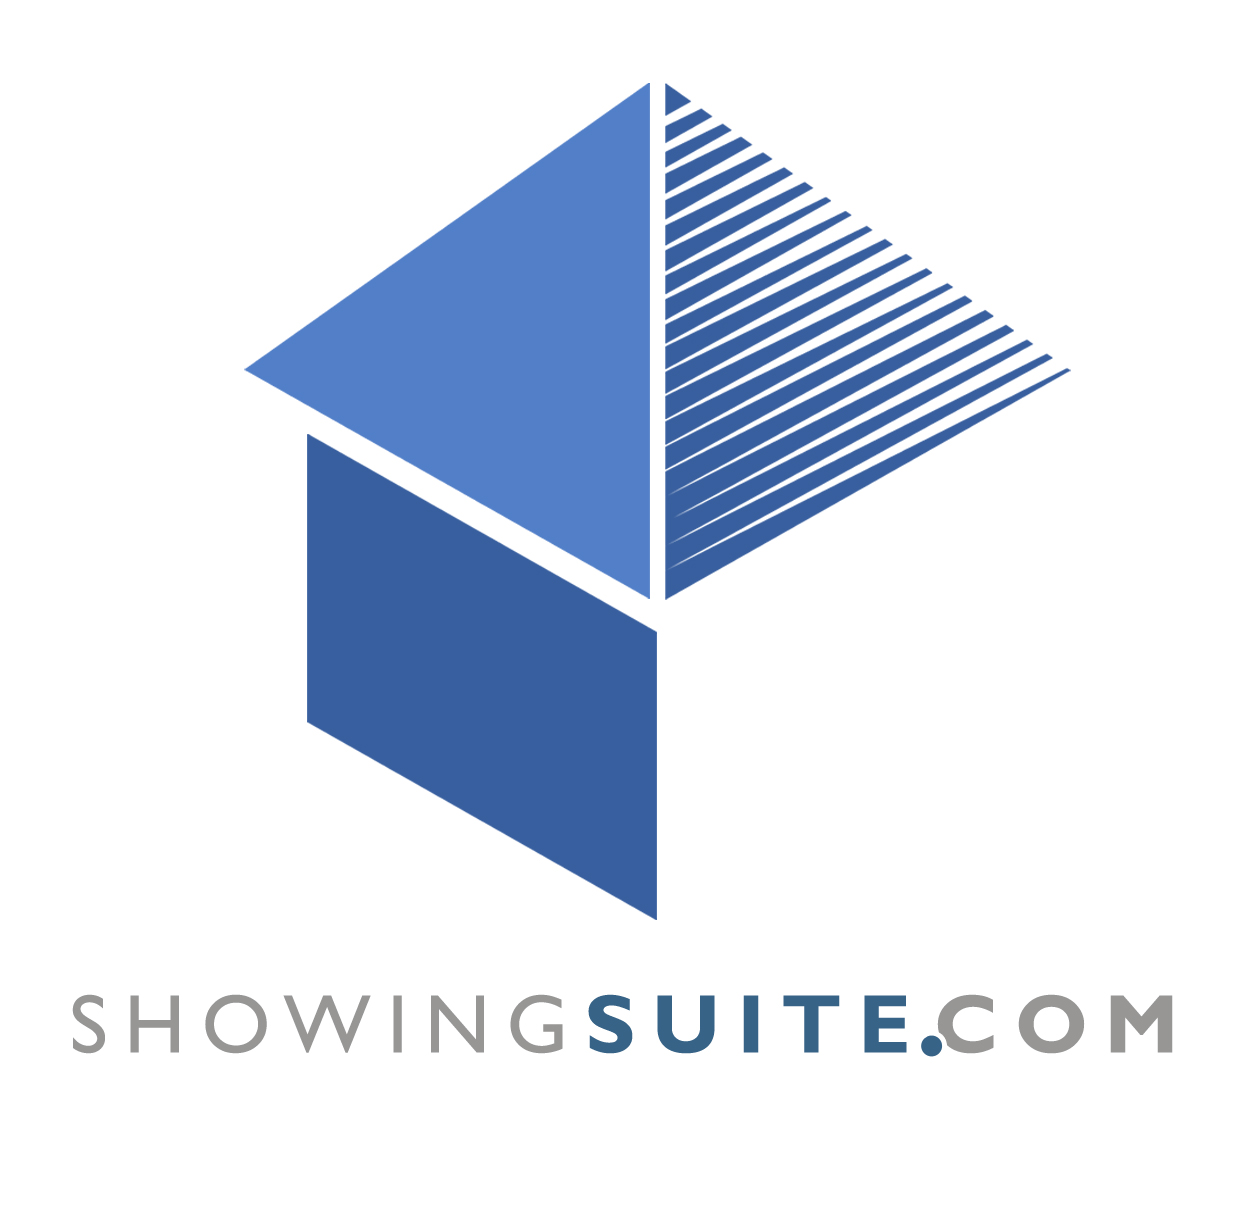 NEWshowing suite high res